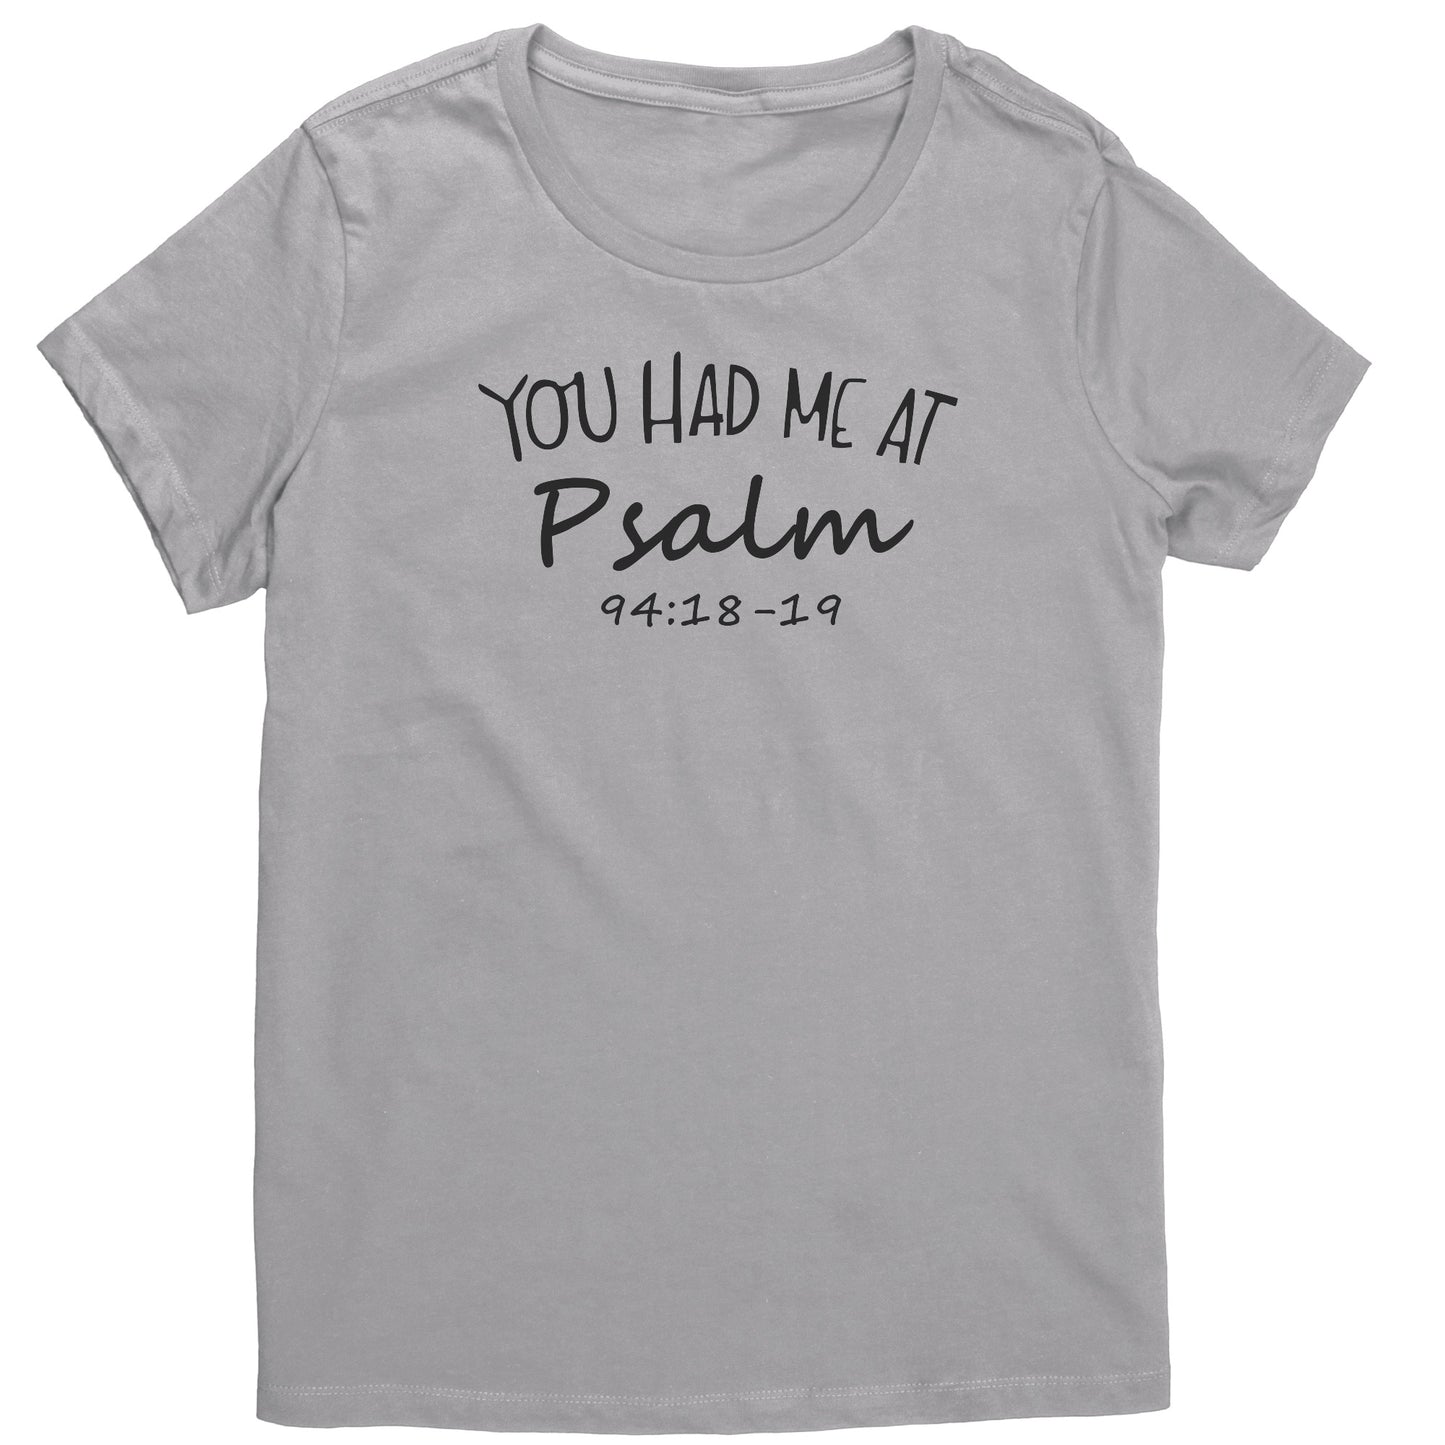 You Had Me At Psalm 94:18-19 Women's T-Shirt Part 1